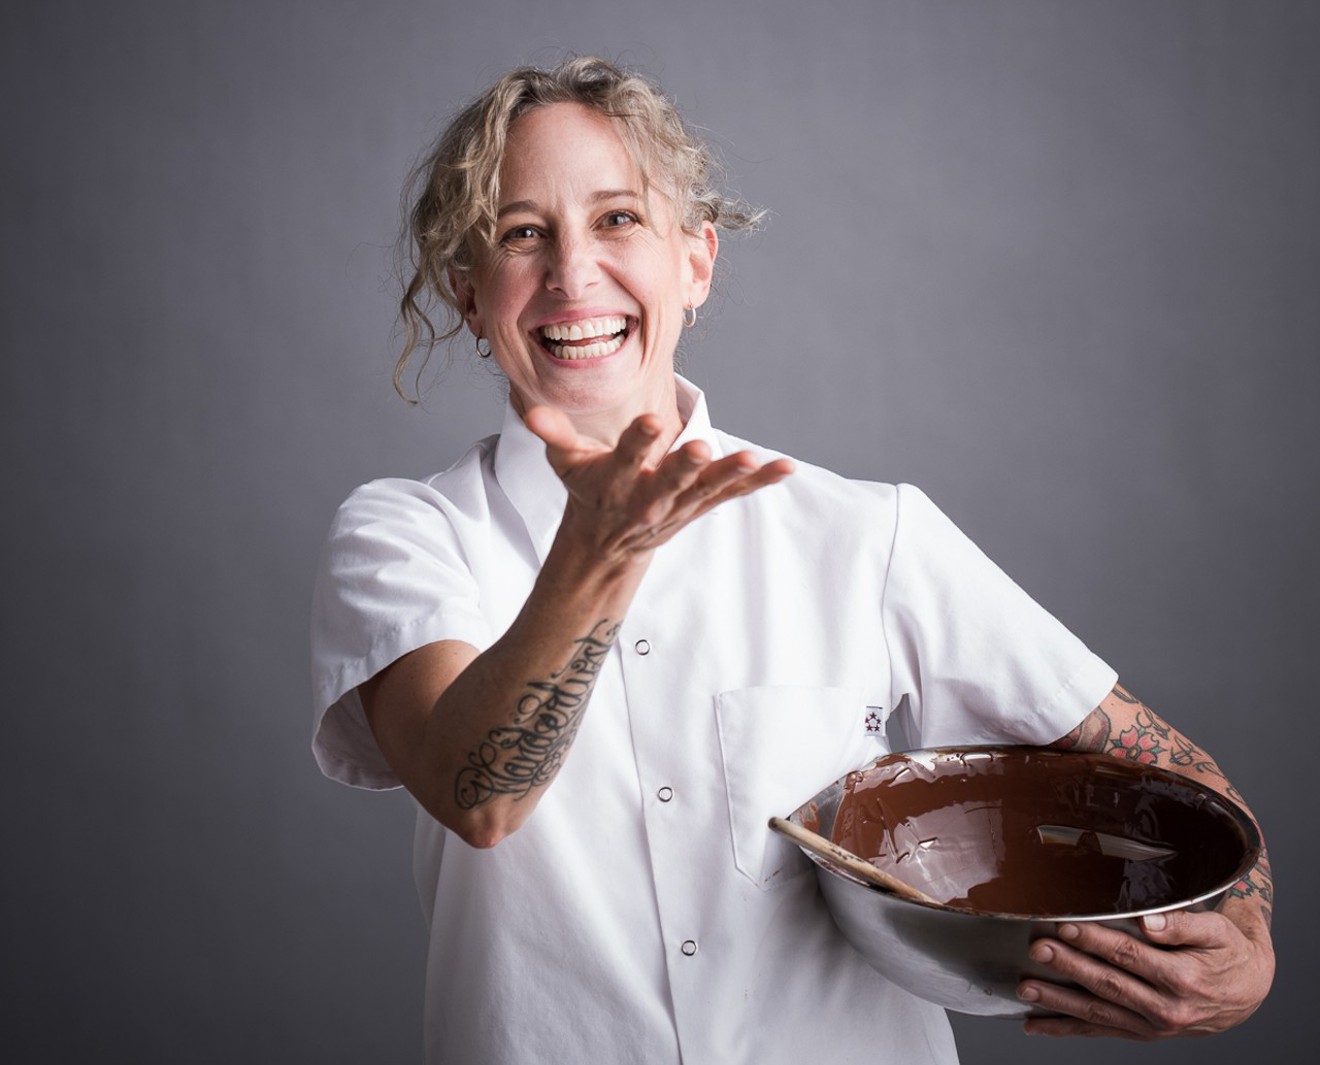 Katherine Clapner has so much more than chocolate up her sleeve.